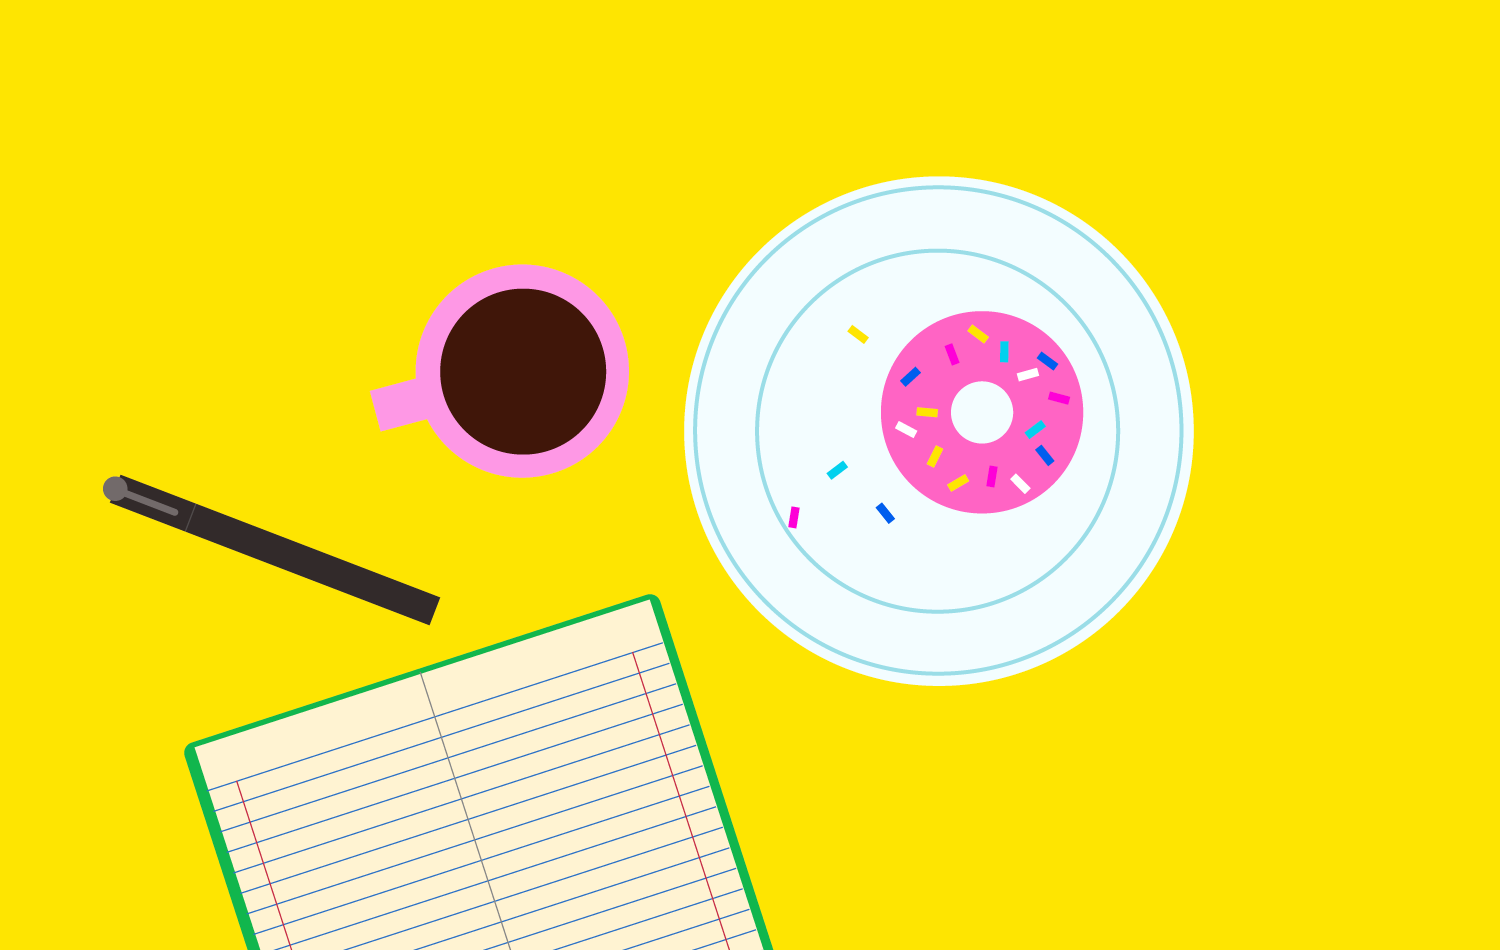 Donut on plate with coffee and notebook opened